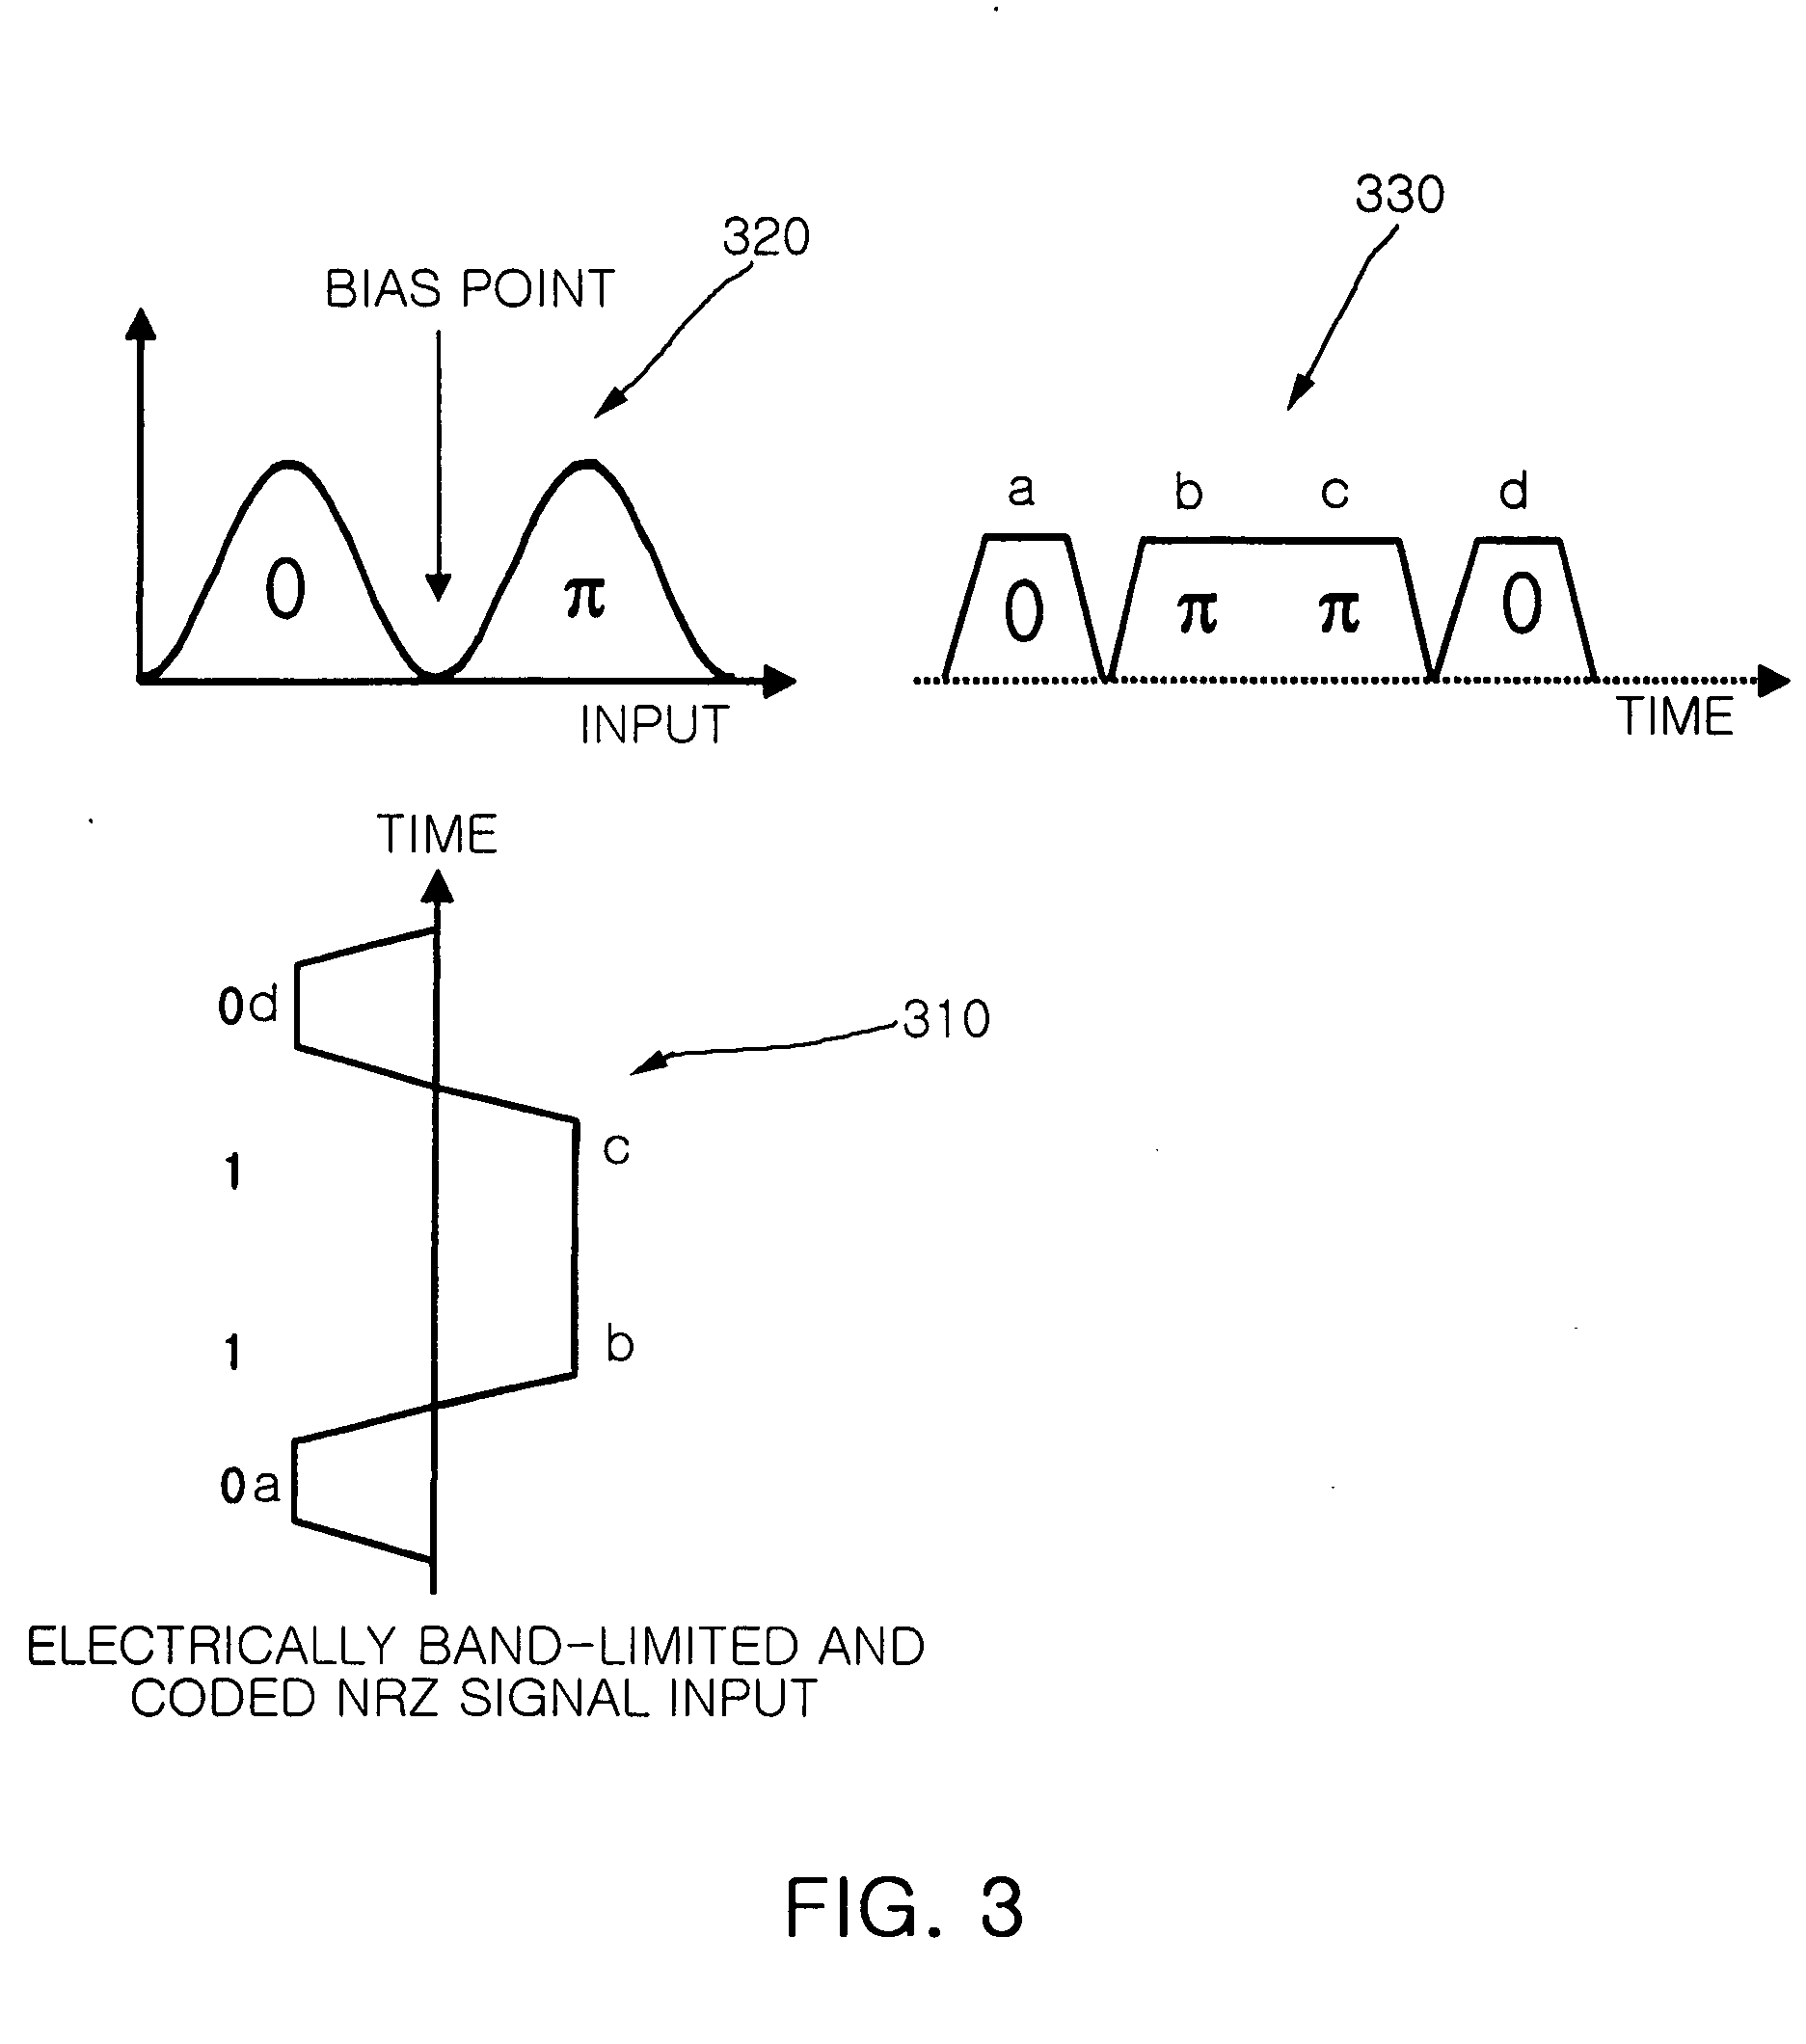 Apparatus and method for performing electrically band-limited optical differential phase shift keying modulation